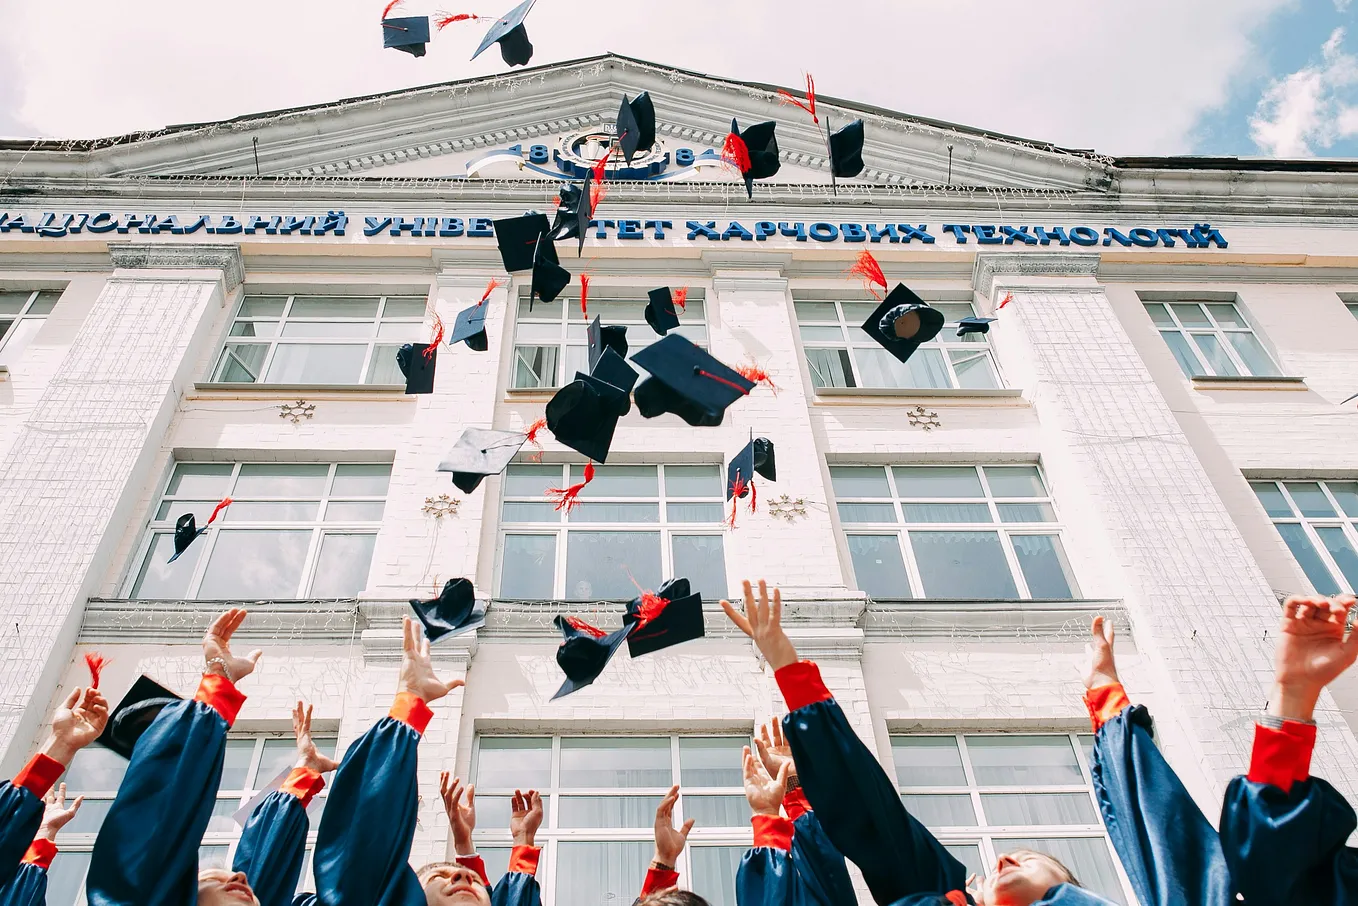 Several graduates throwing their mortarboards in the air in front of a white building